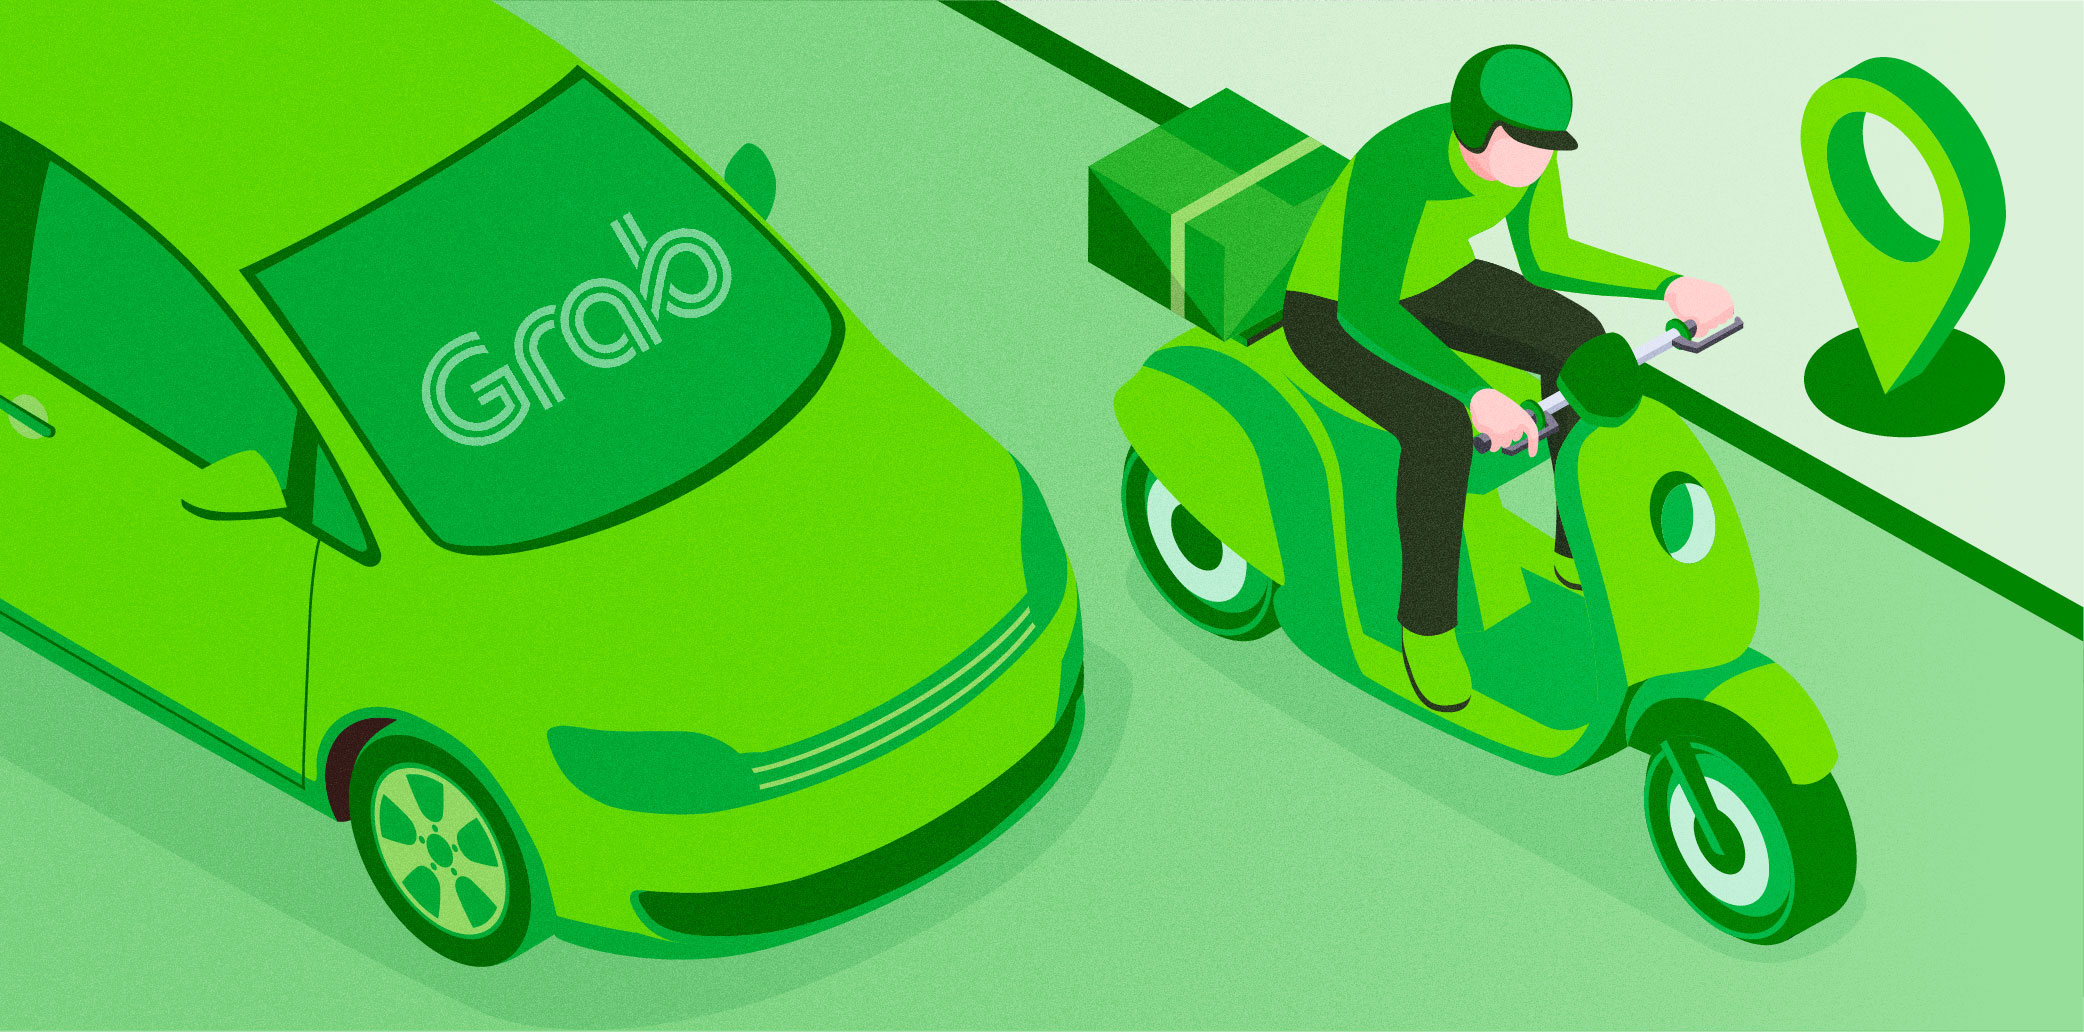 Grab, Be Group, and Baemin raise fares in Vietnam amid soaring gasoline prices | KrASIA